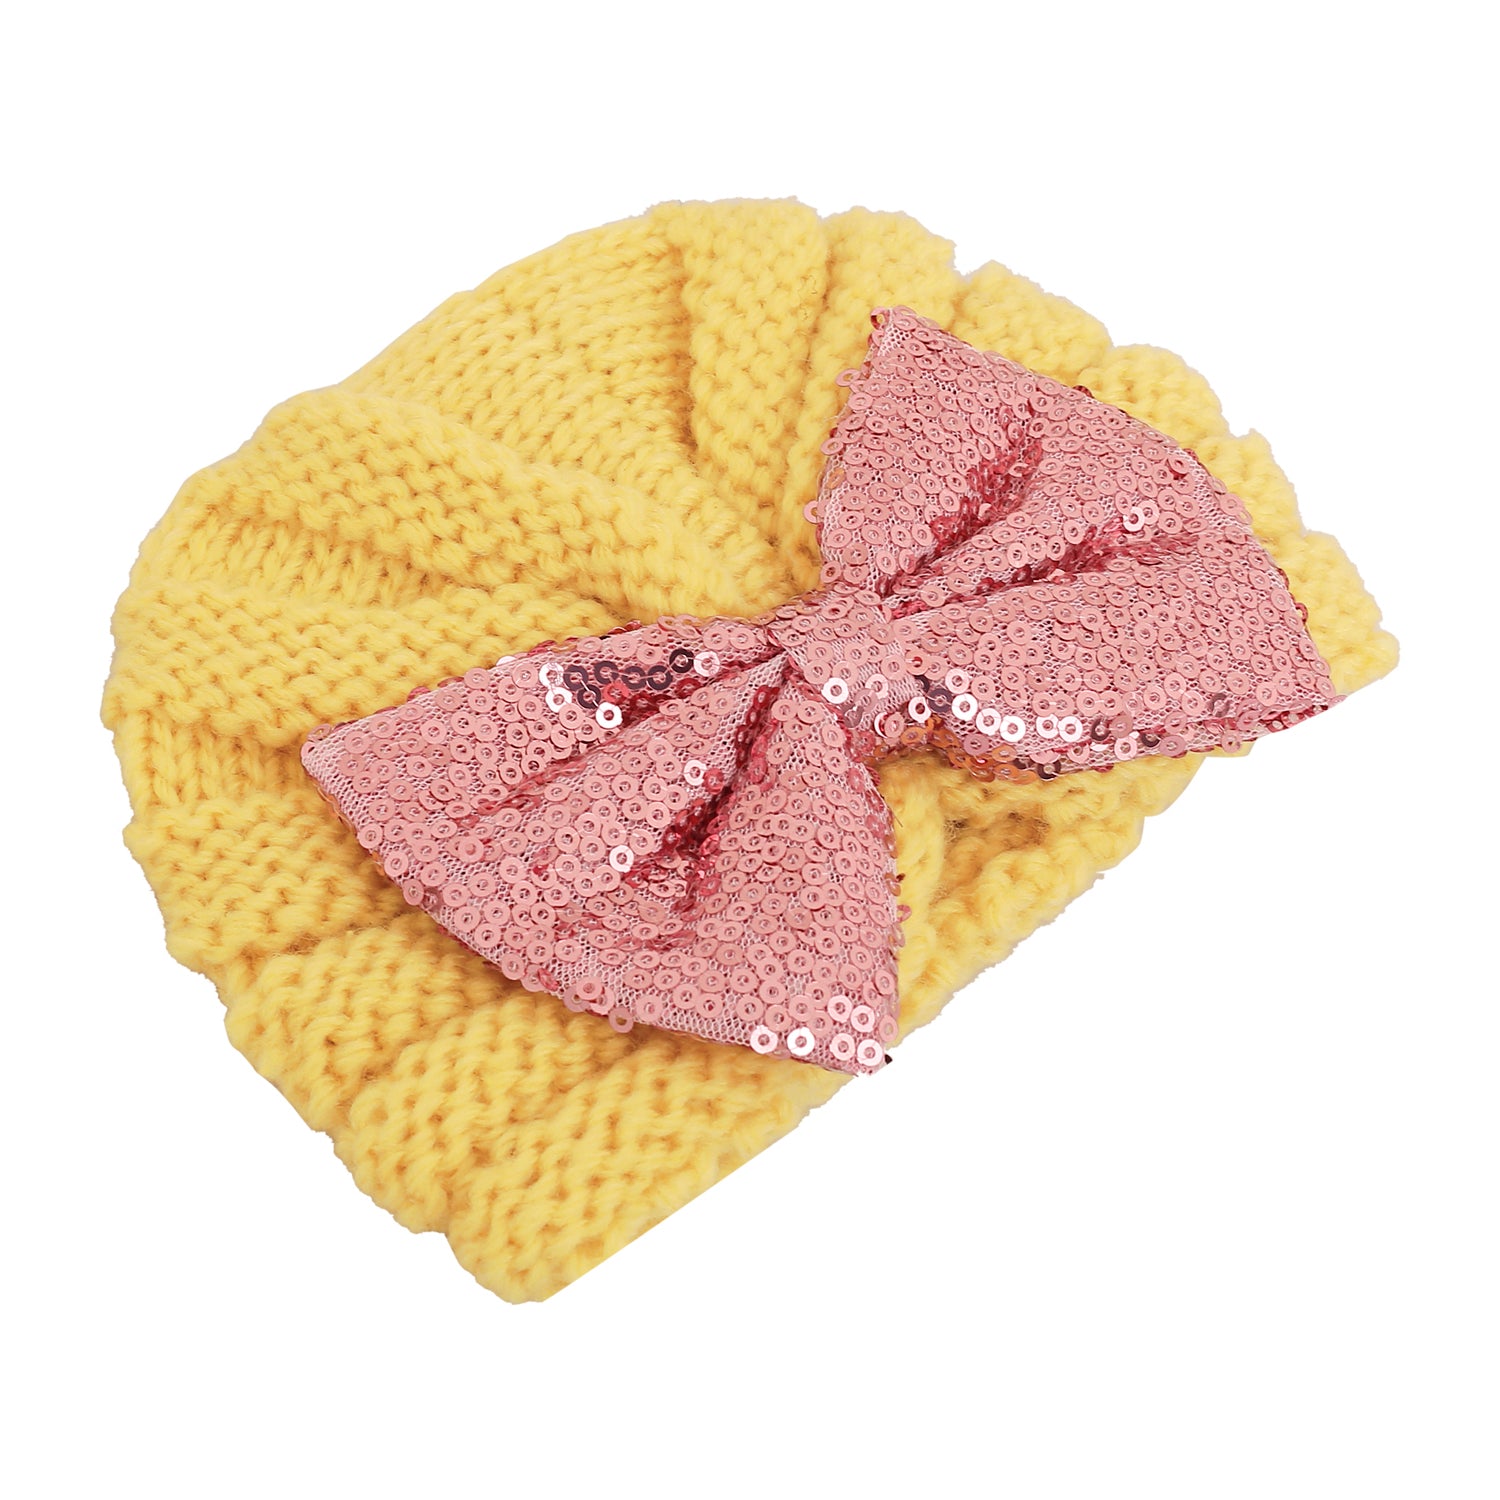 Partywear Yellow And Pink Turban Cap - Baby Moo